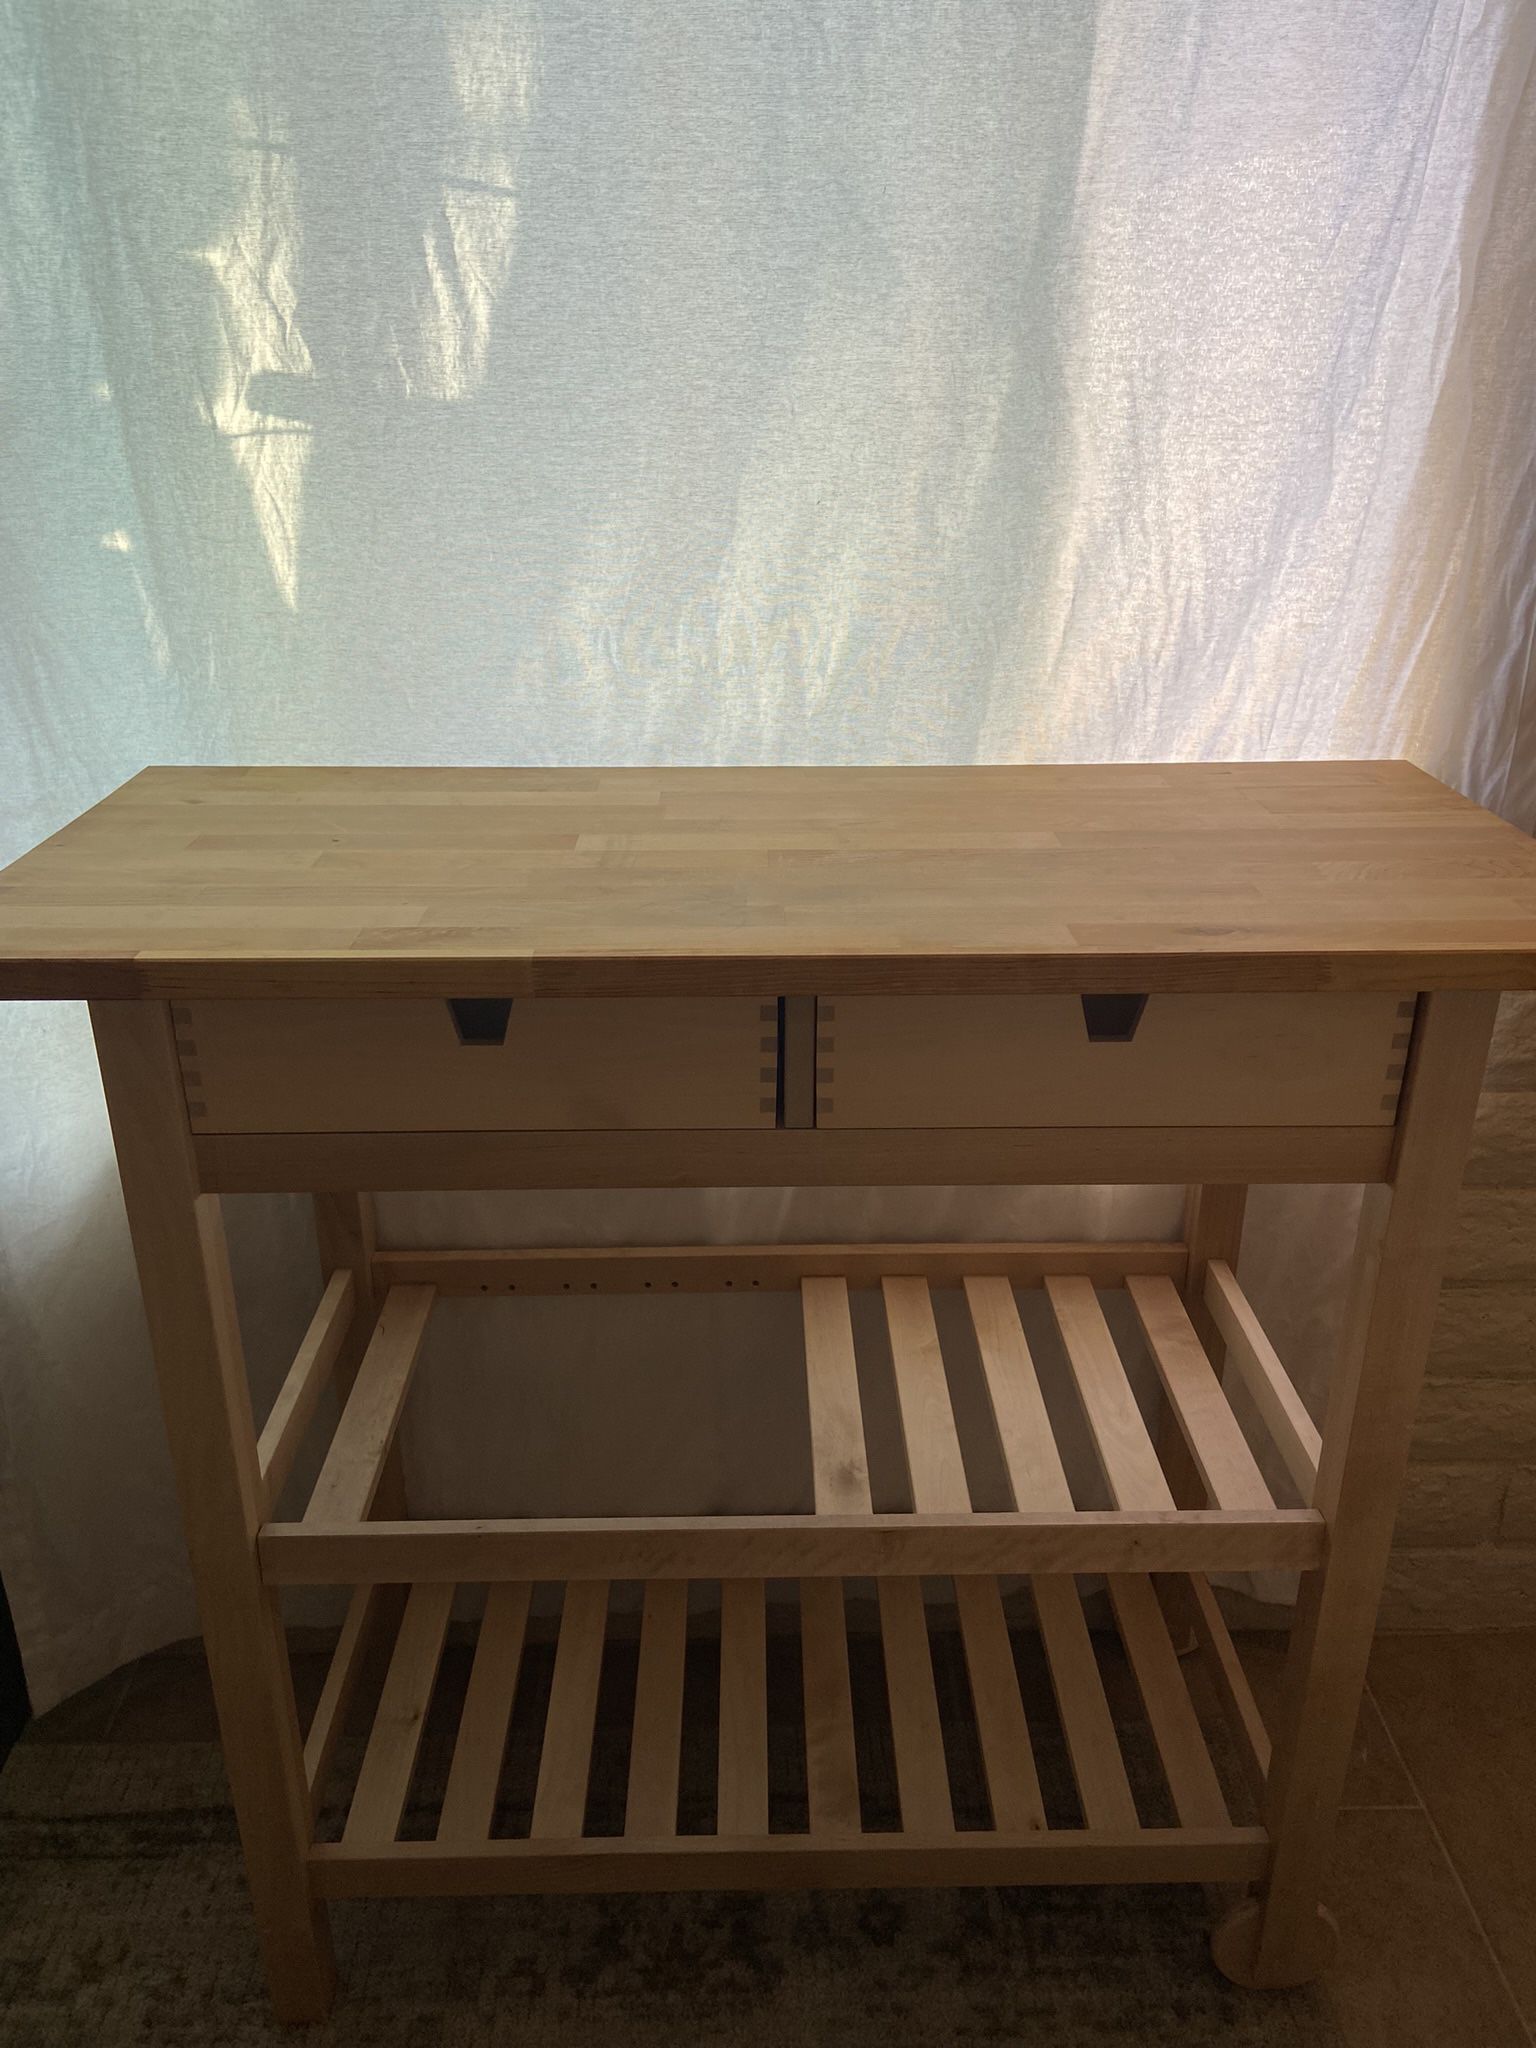 Wooden Table Or Kitchen Island